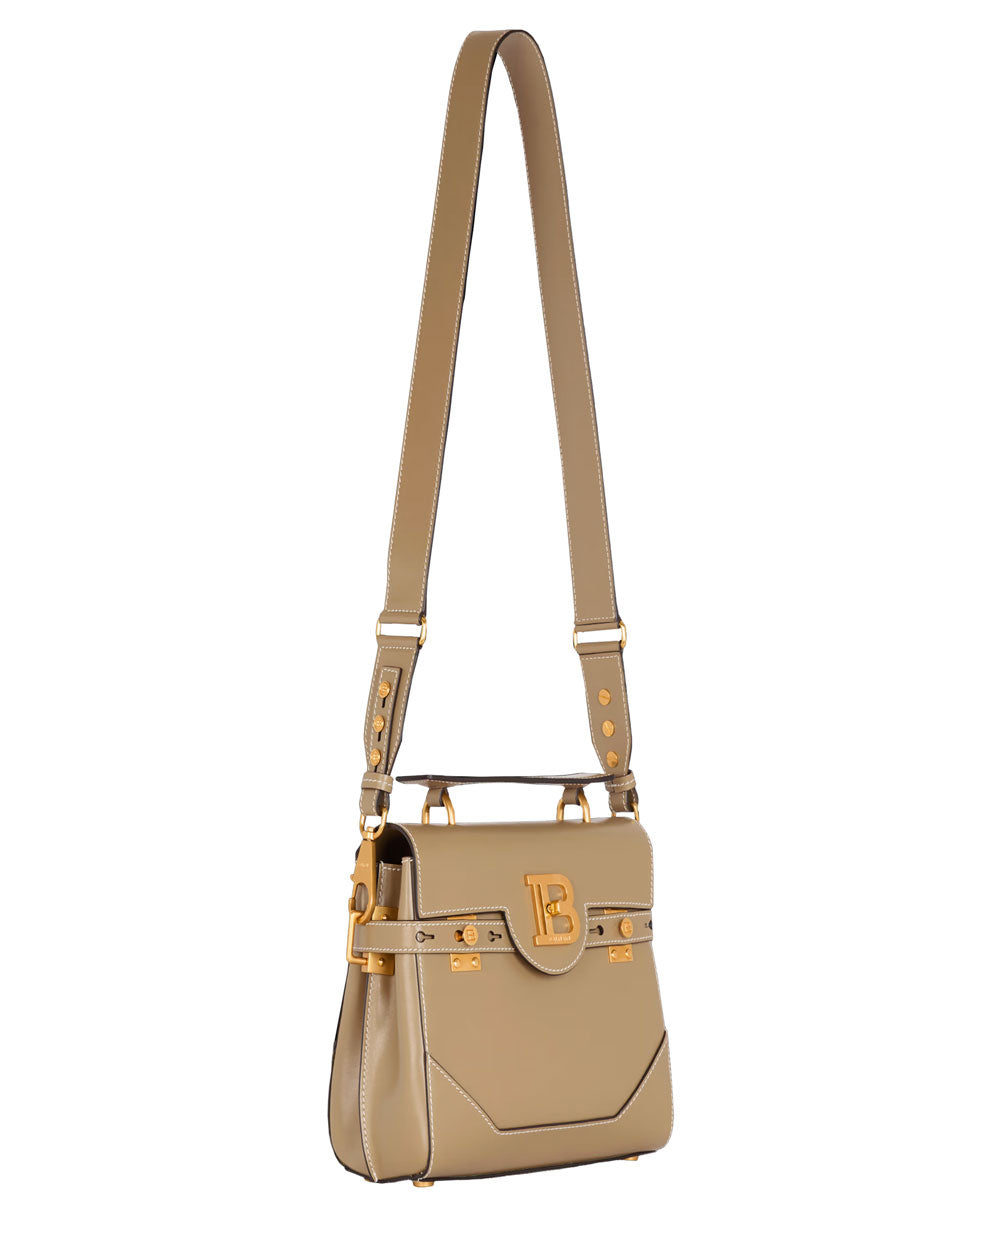 B-Buzz 23 Bag in Taupe